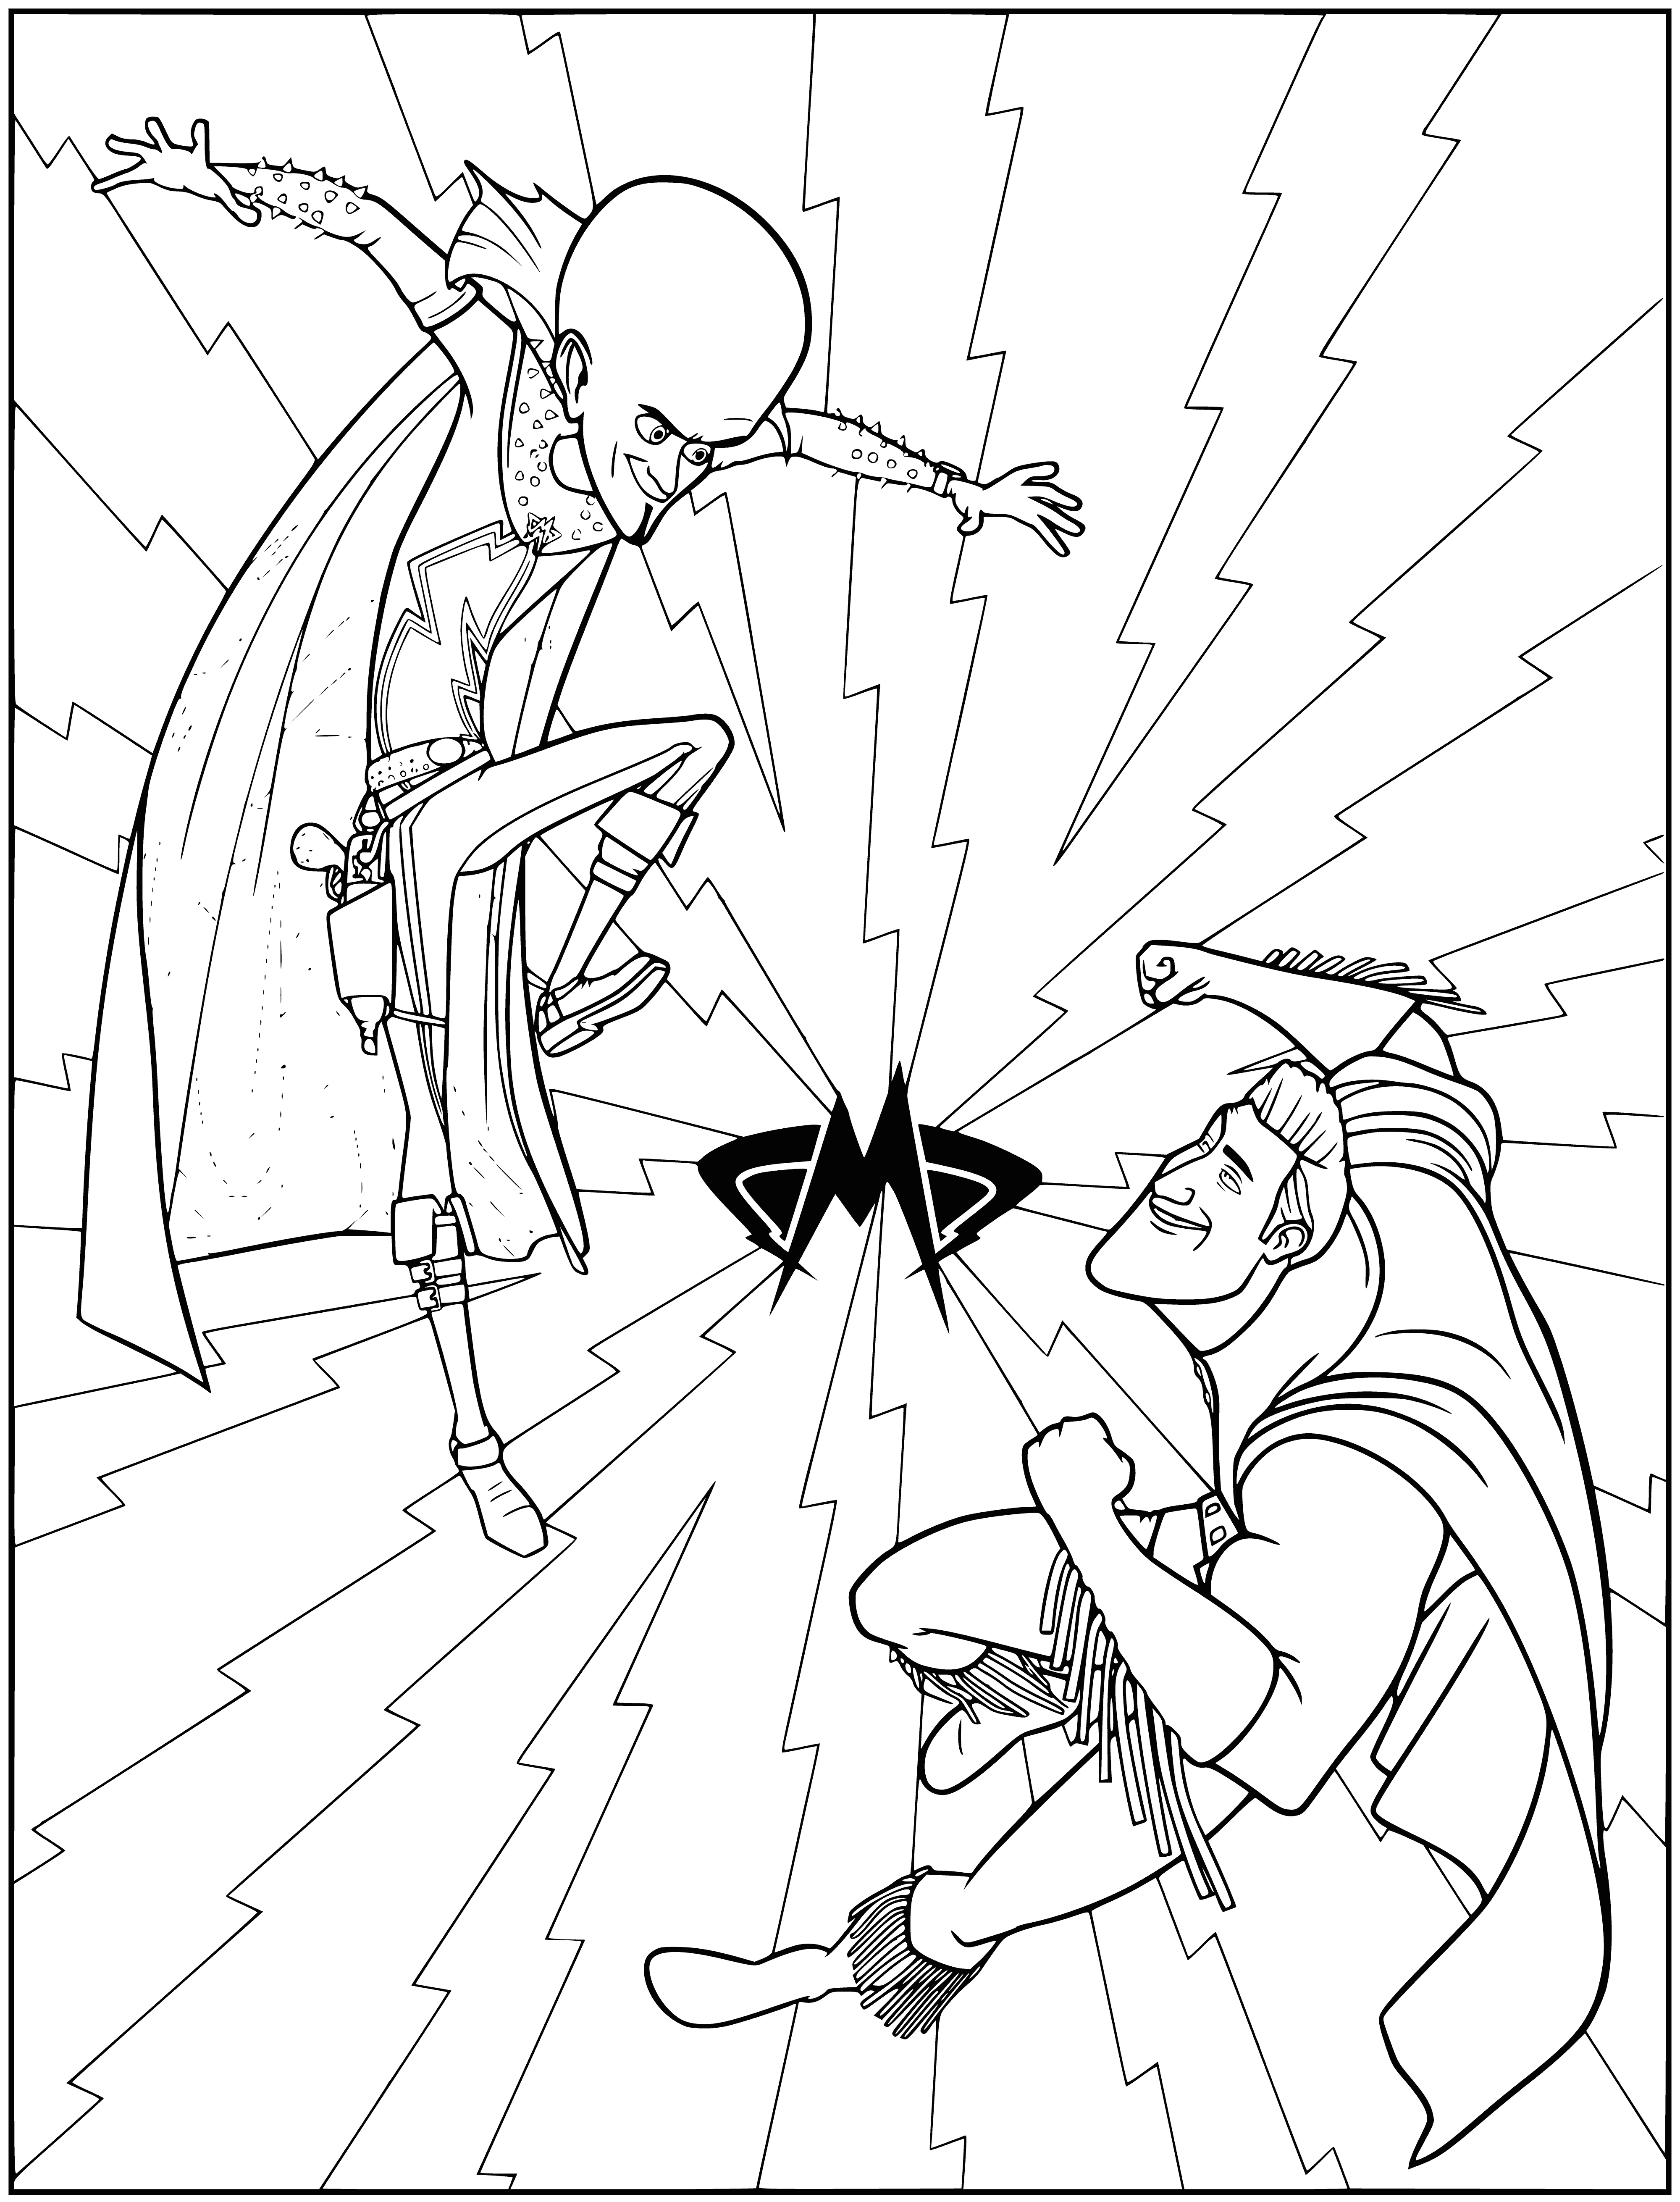 coloring page: The blue man is surrounded by small, green men with big teeth, & he's holding a gun.